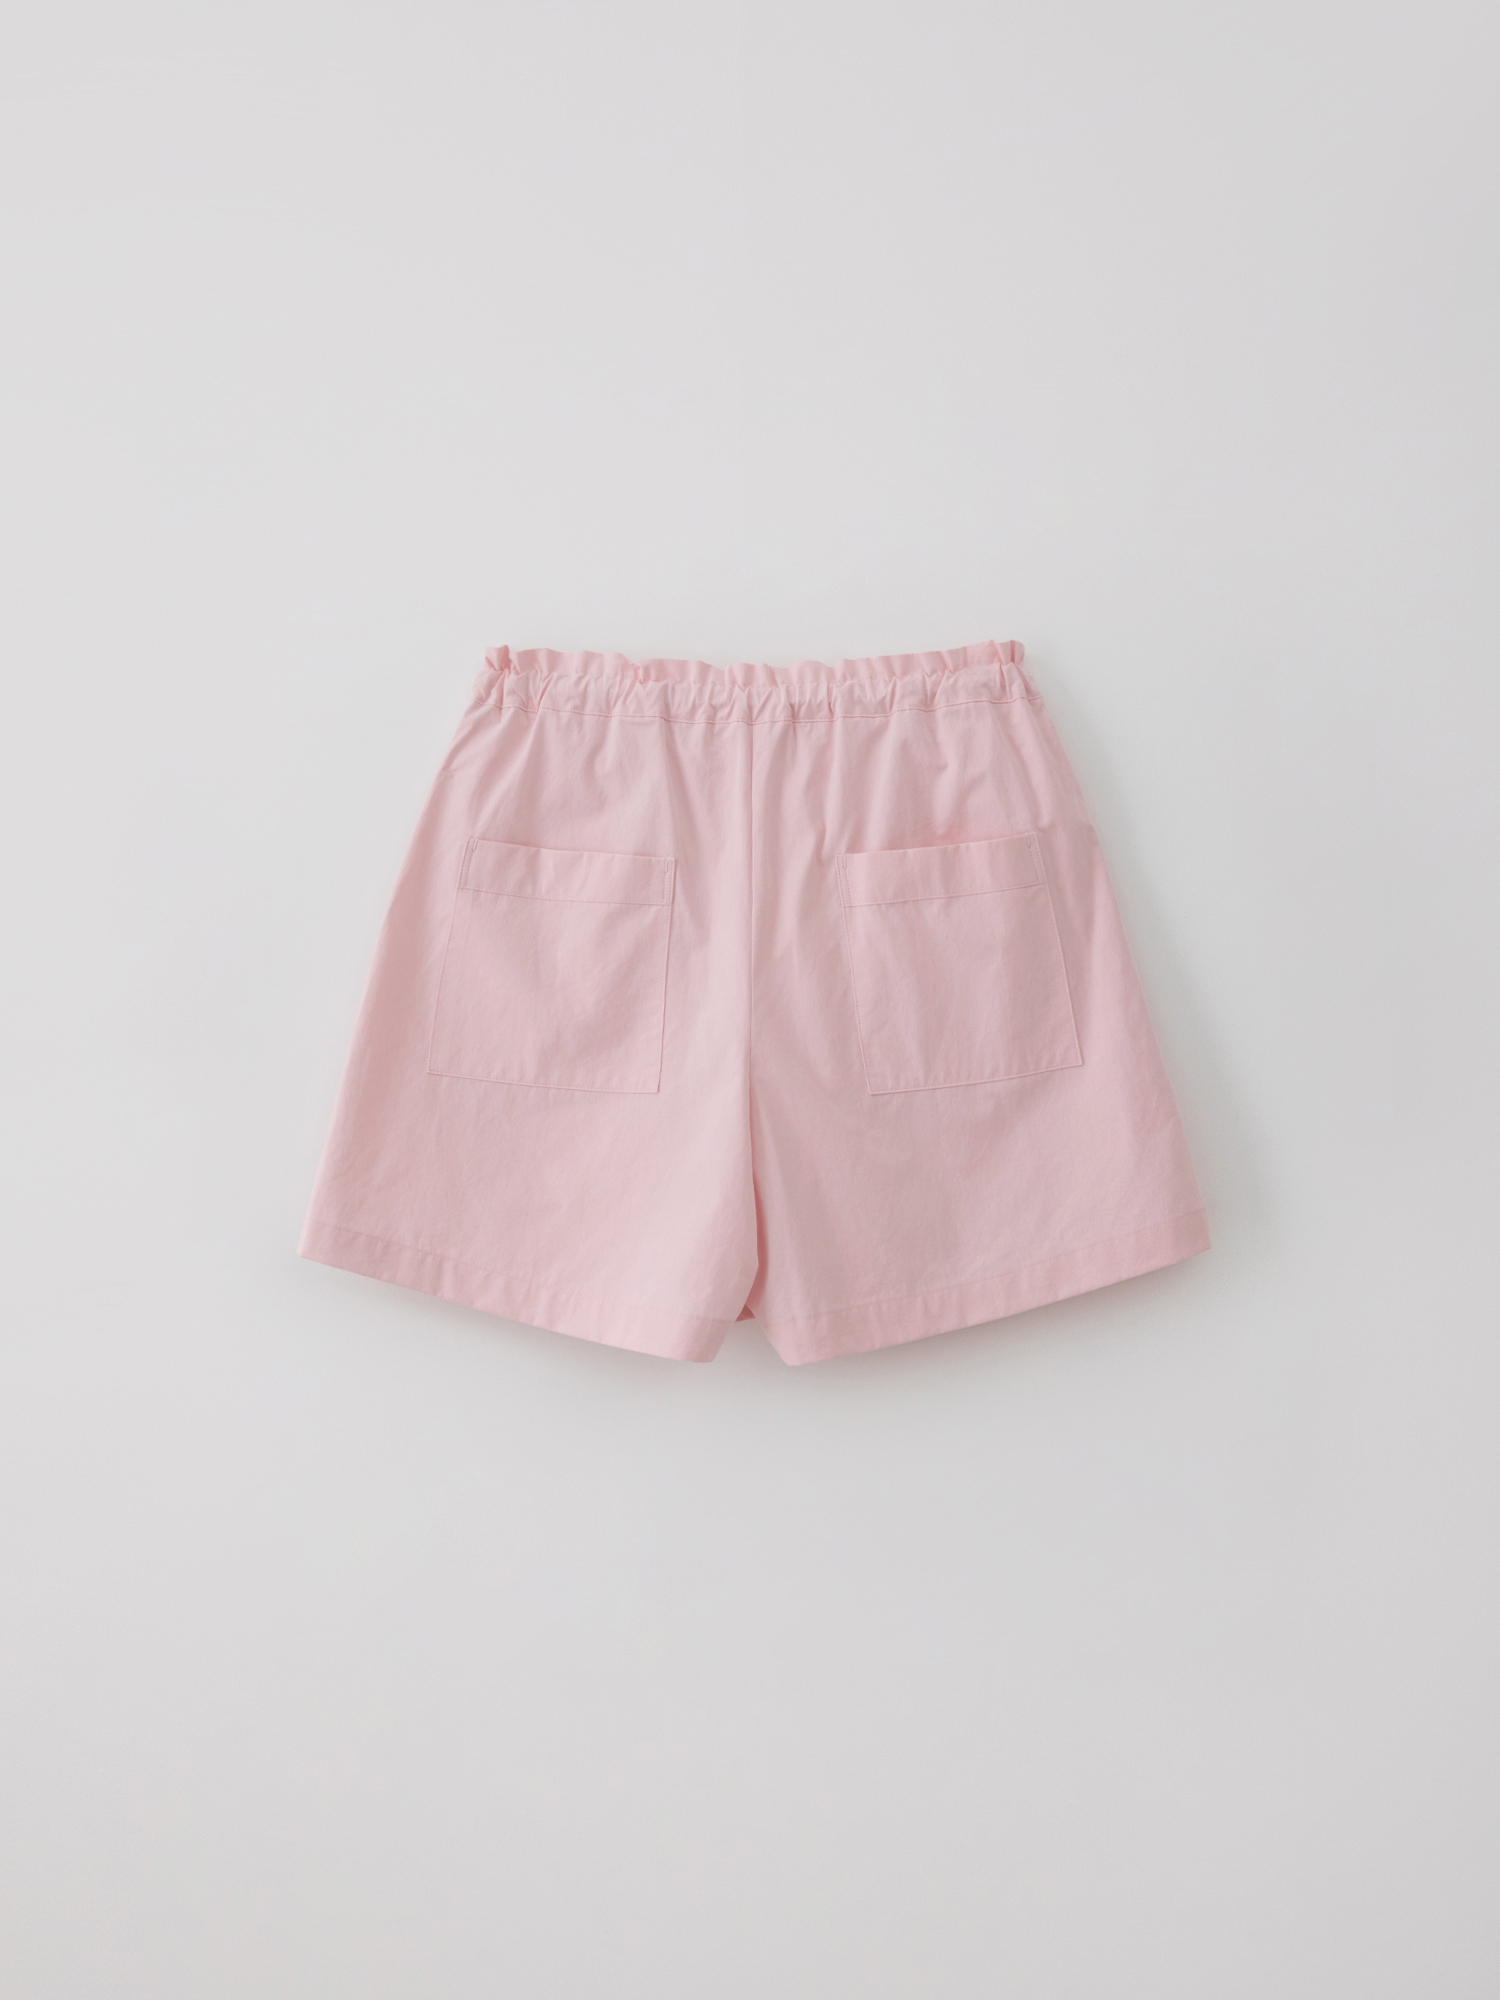 Wide cotton shorts (light pink)